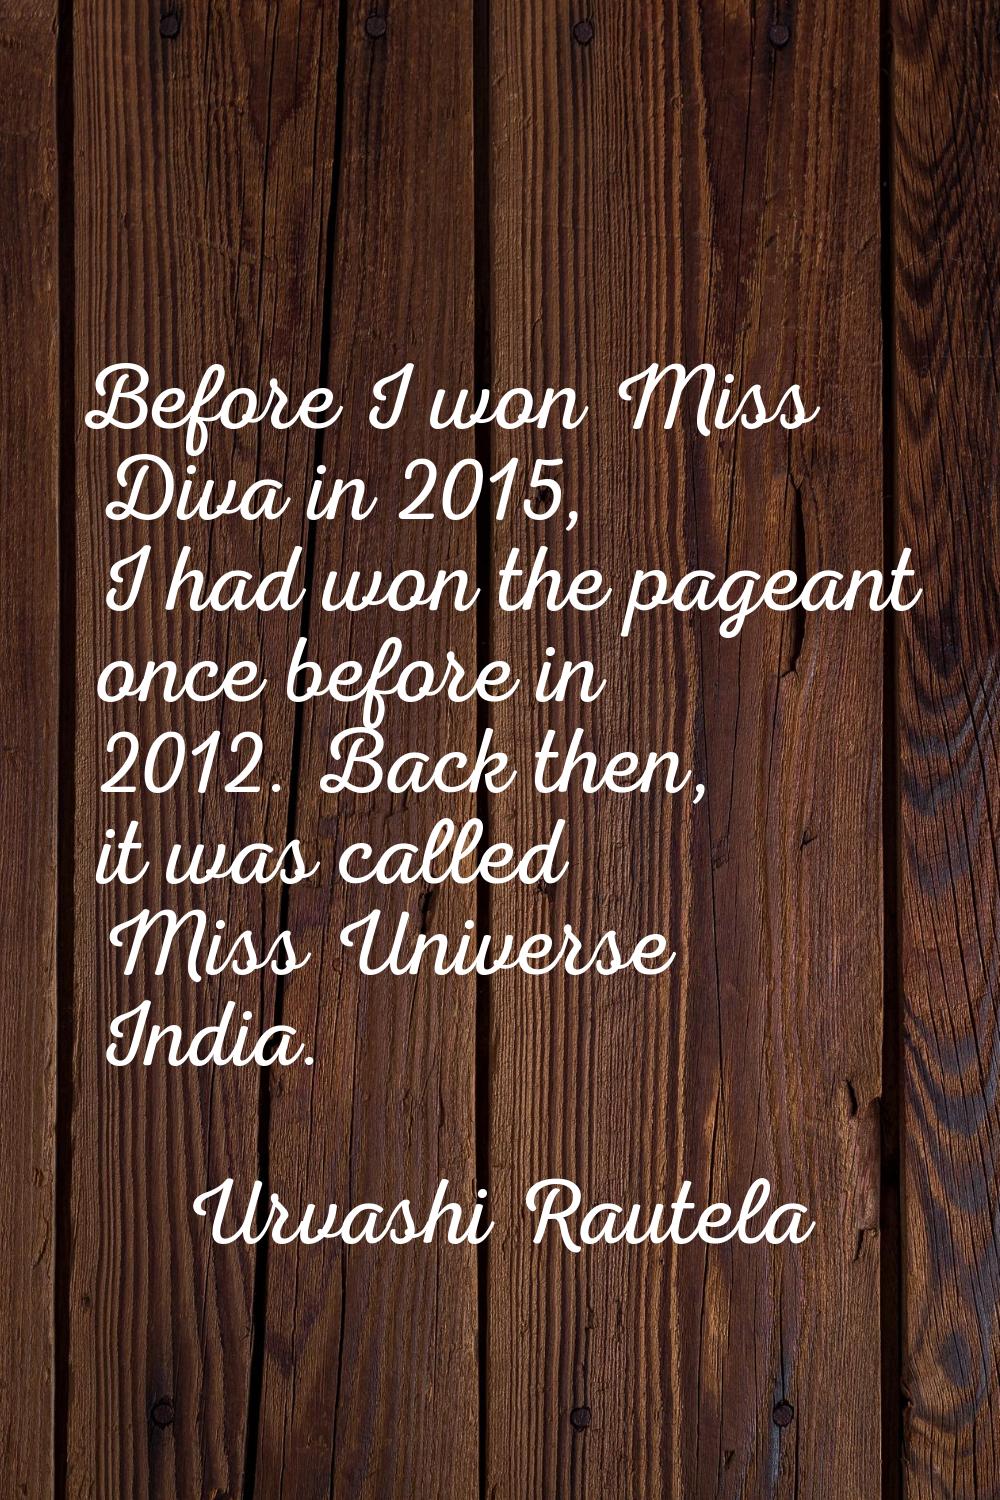 Before I won Miss Diva in 2015, I had won the pageant once before in 2012. Back then, it was called